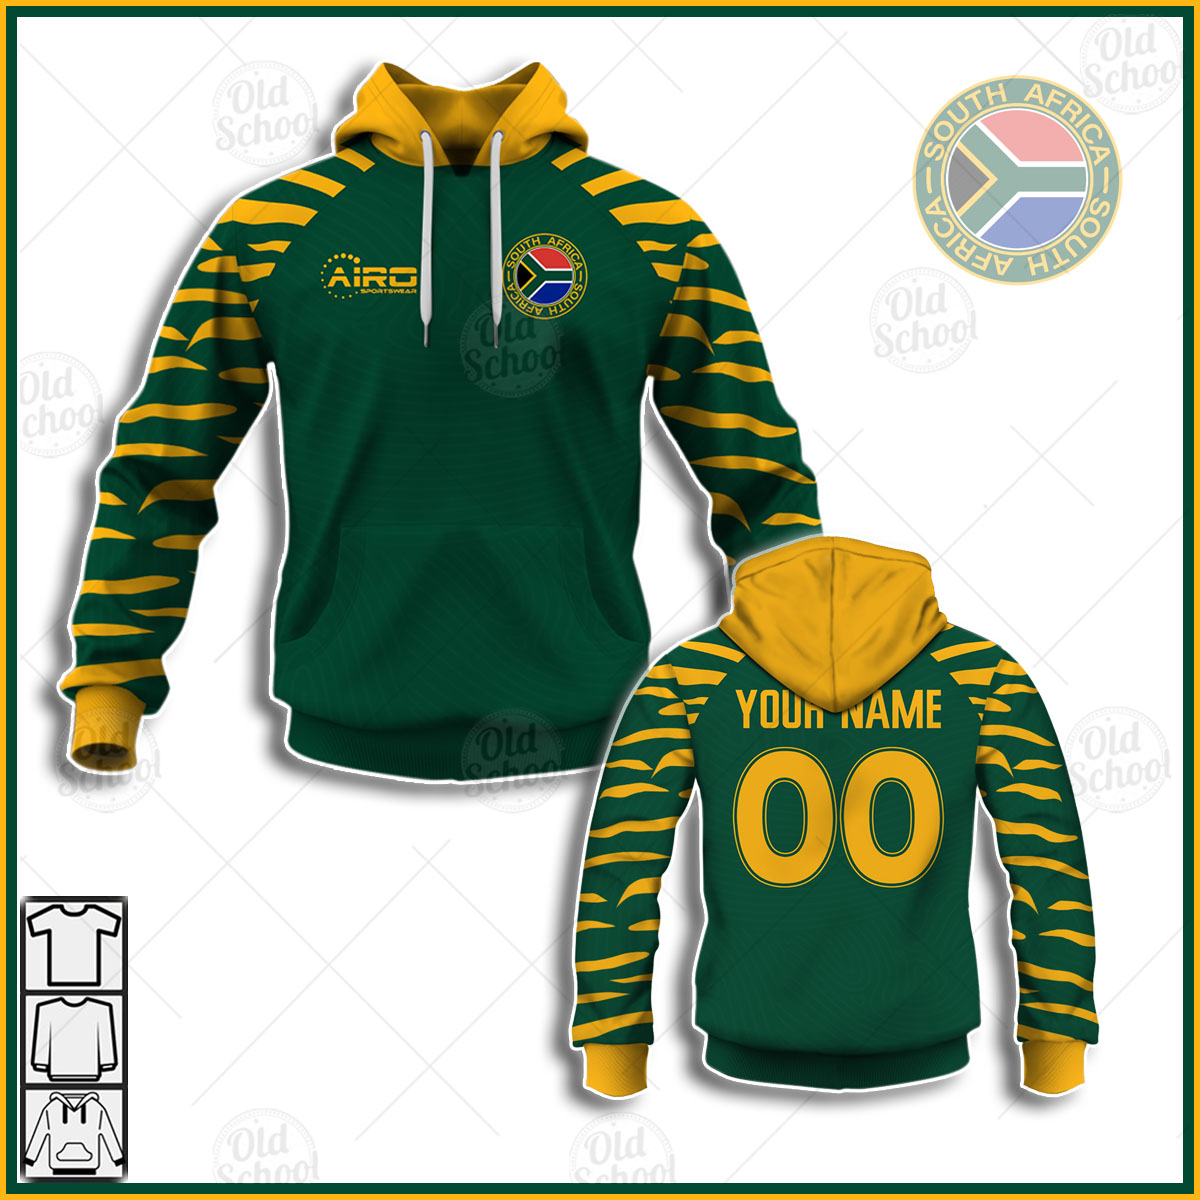 Personalise 2020-2021 South Africa Springboks Home Concept Rugby T-Shirt Jersey